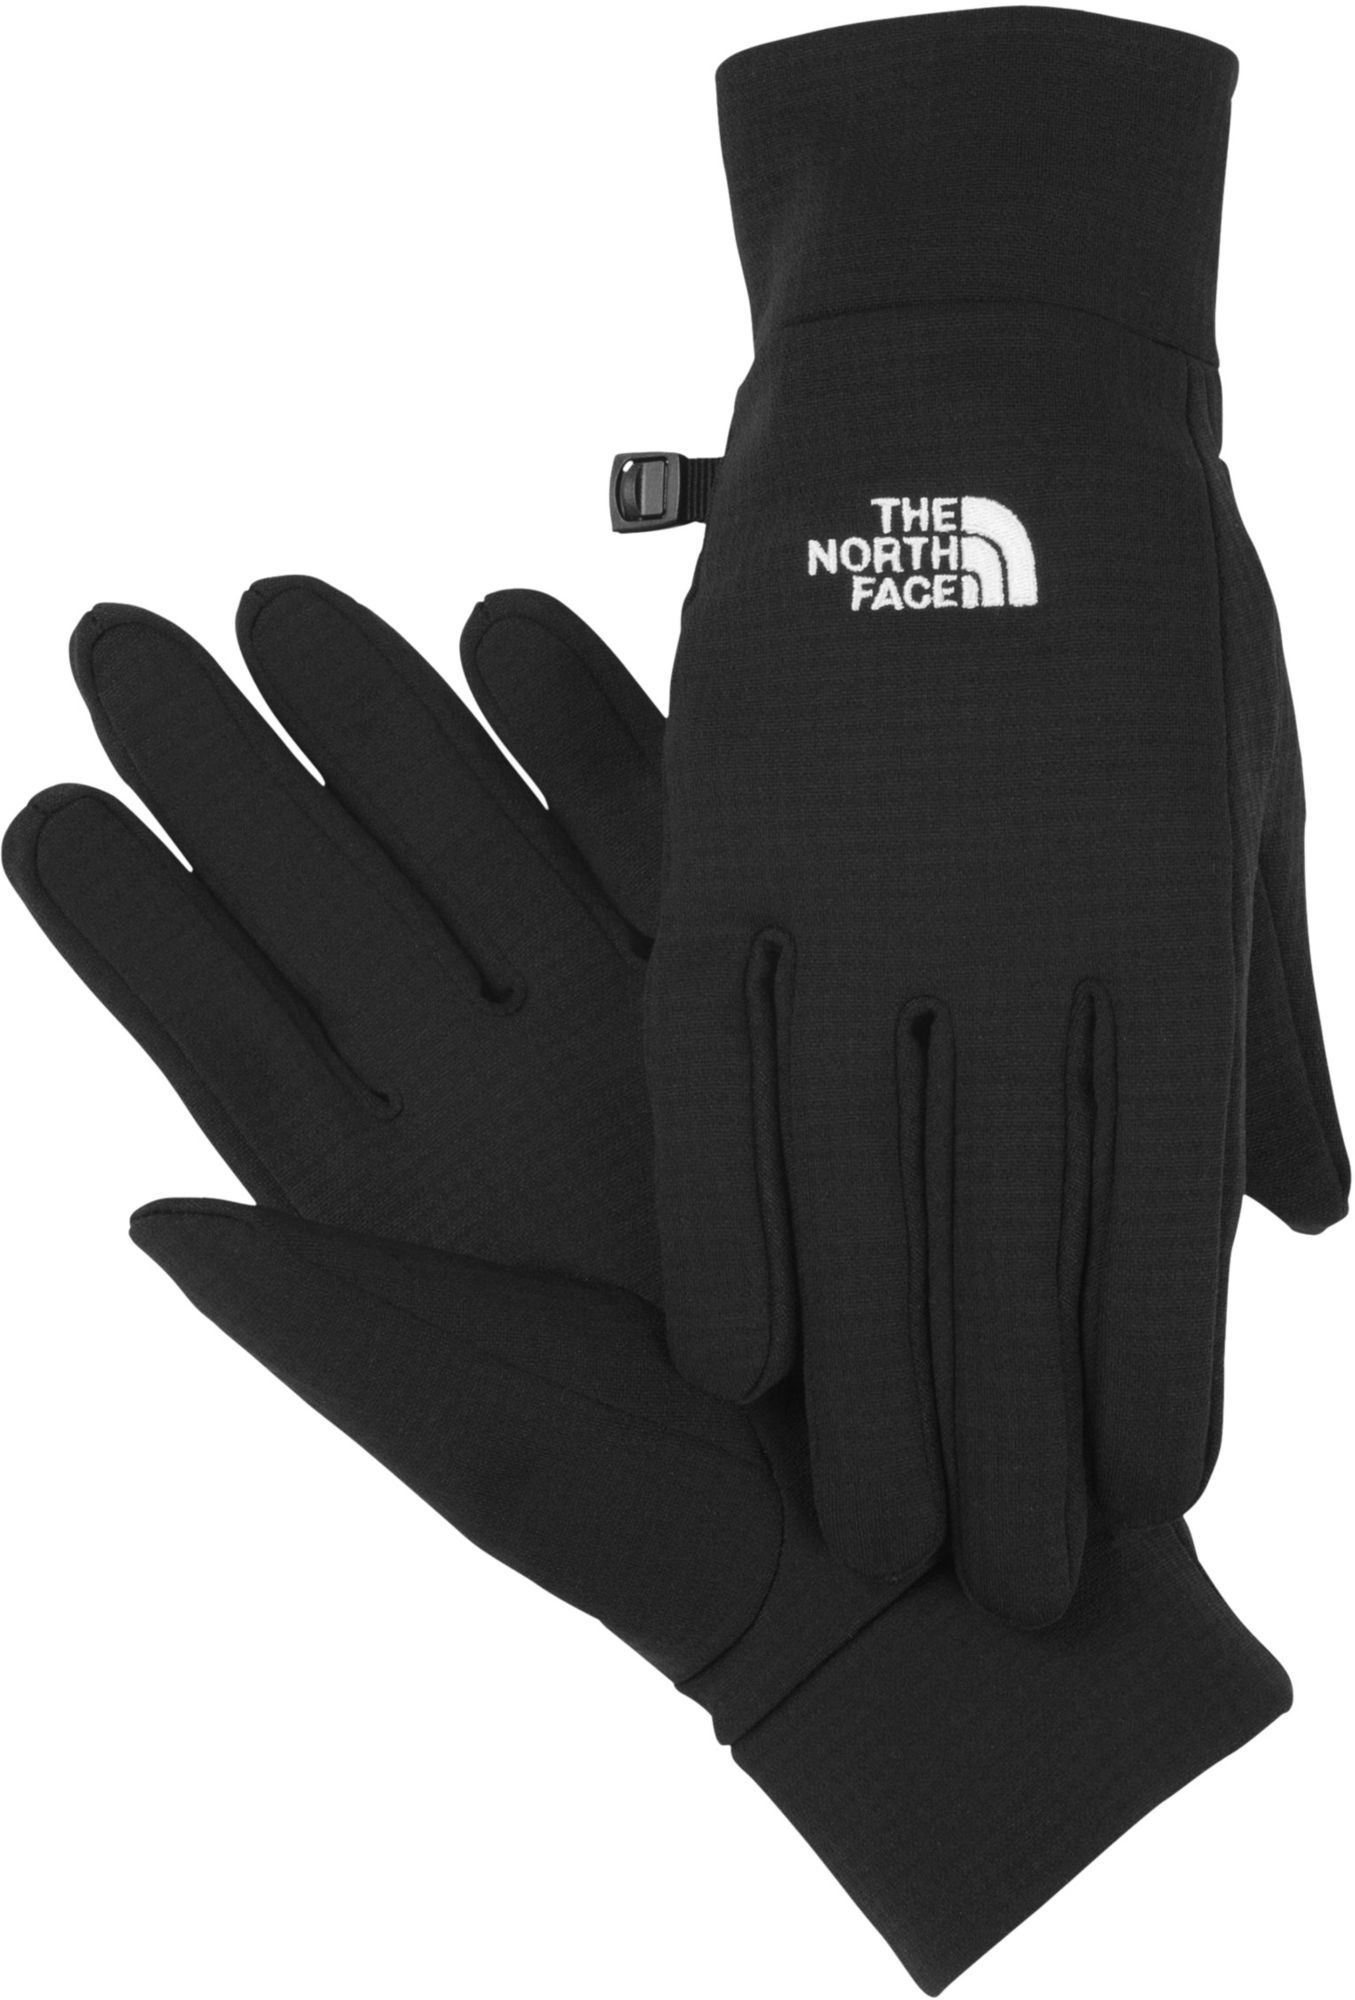 The North Face Unisex FlashDry Liner Gloves | Dick's Sporting Goods